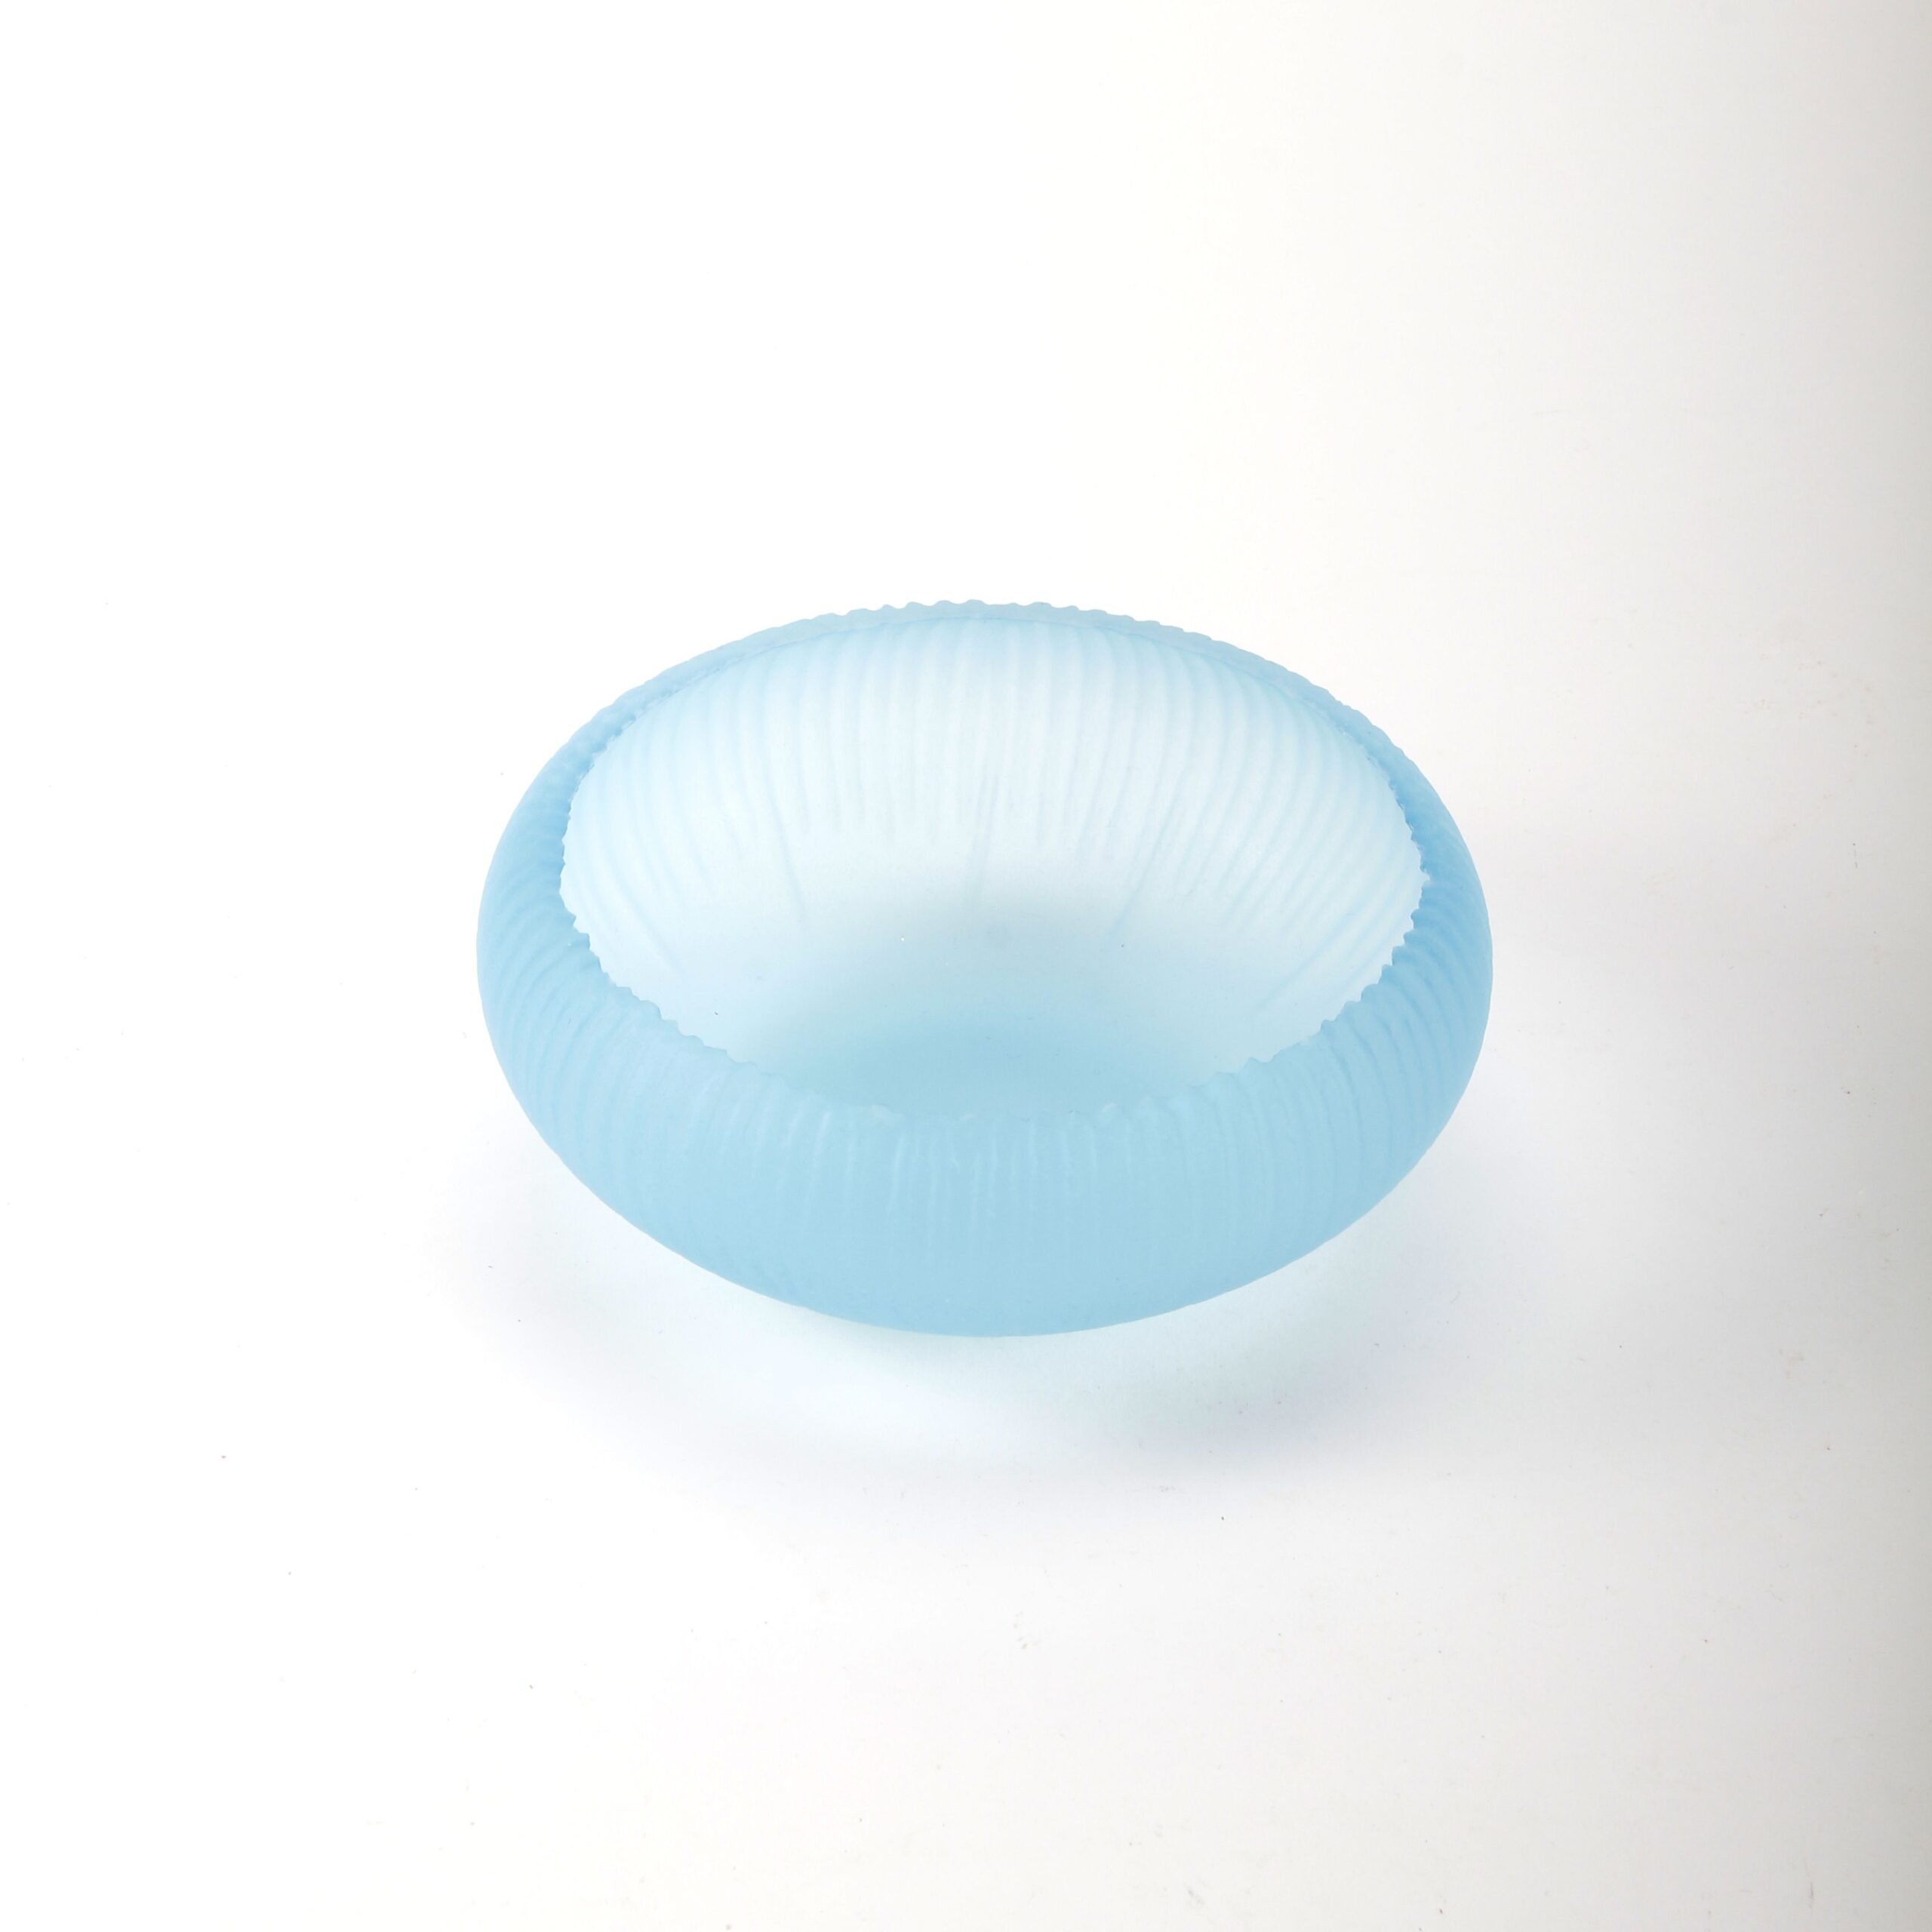 Courtney Downman: Aqua Bowl Carved Ring Dish Product Image 3 of 3